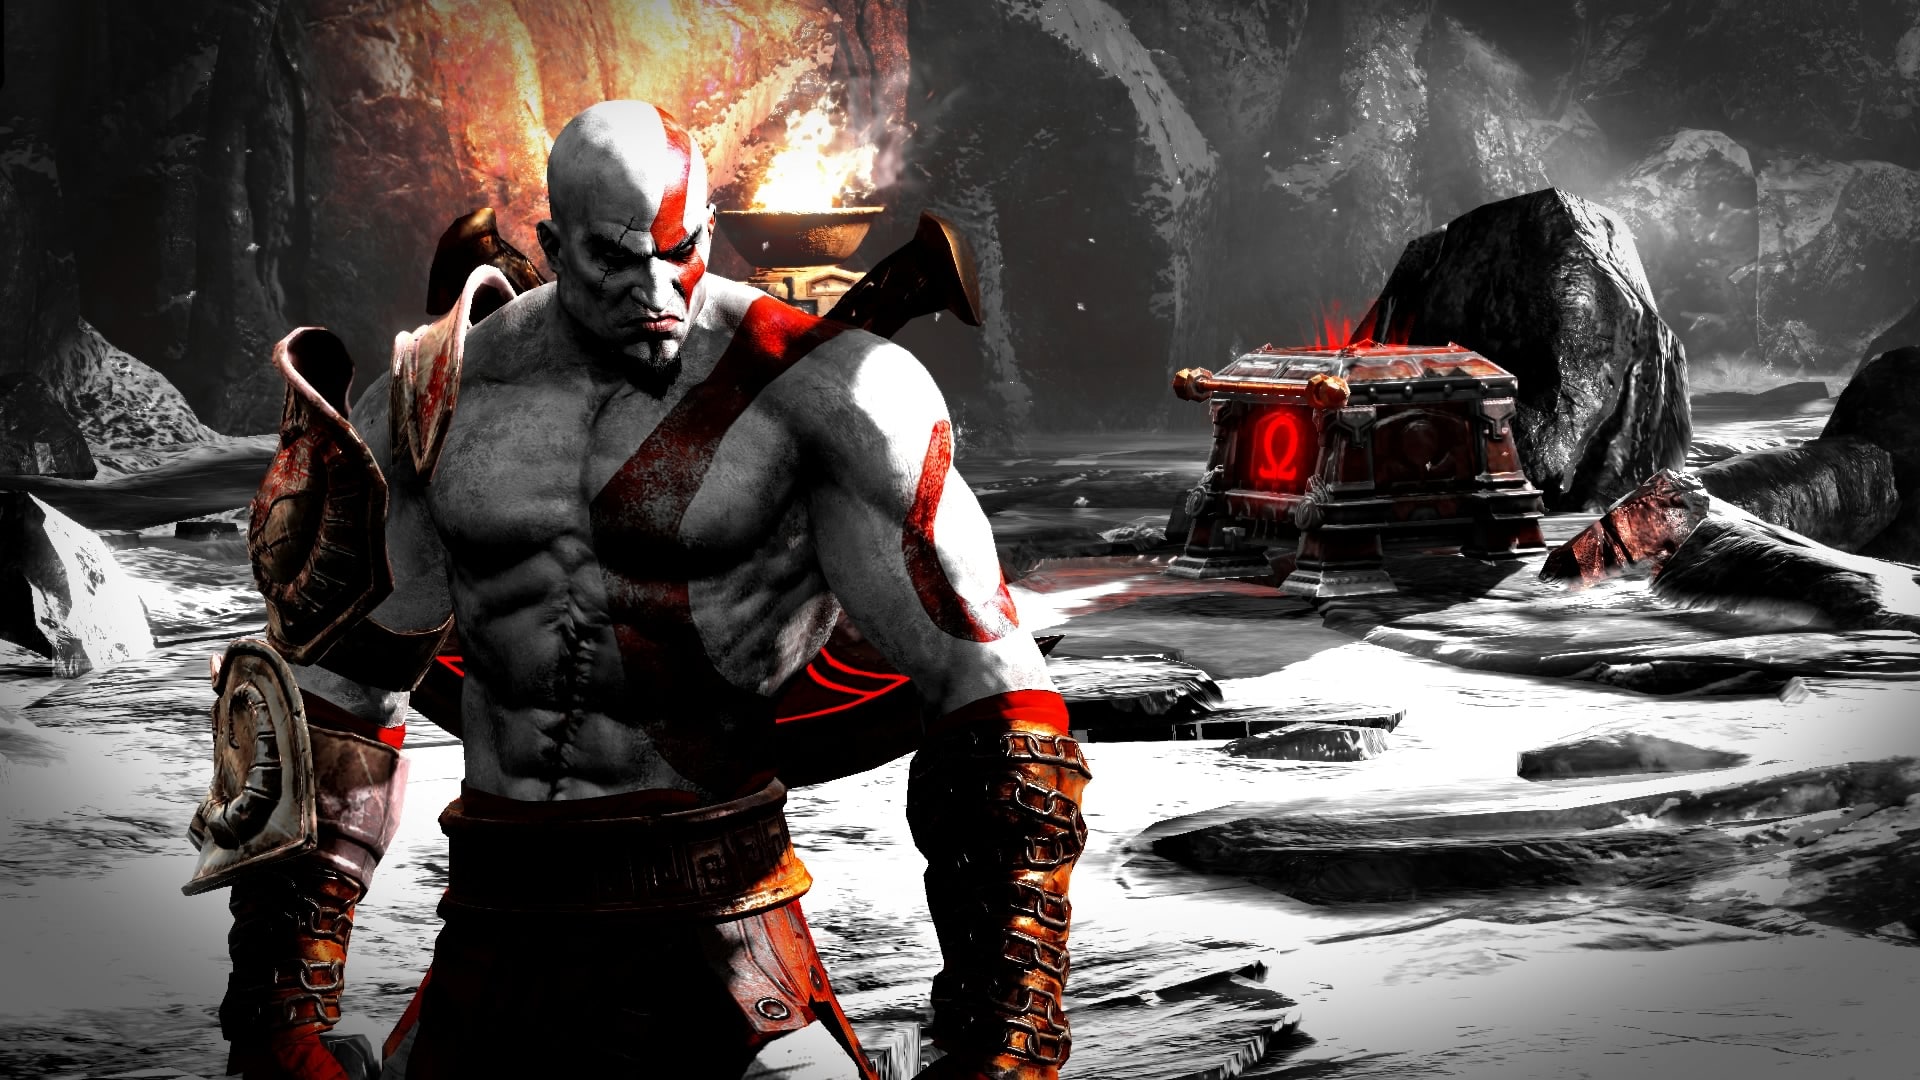 Cheats of God of War 3: Remastered (GOW 3 REMASTERED) for PS4